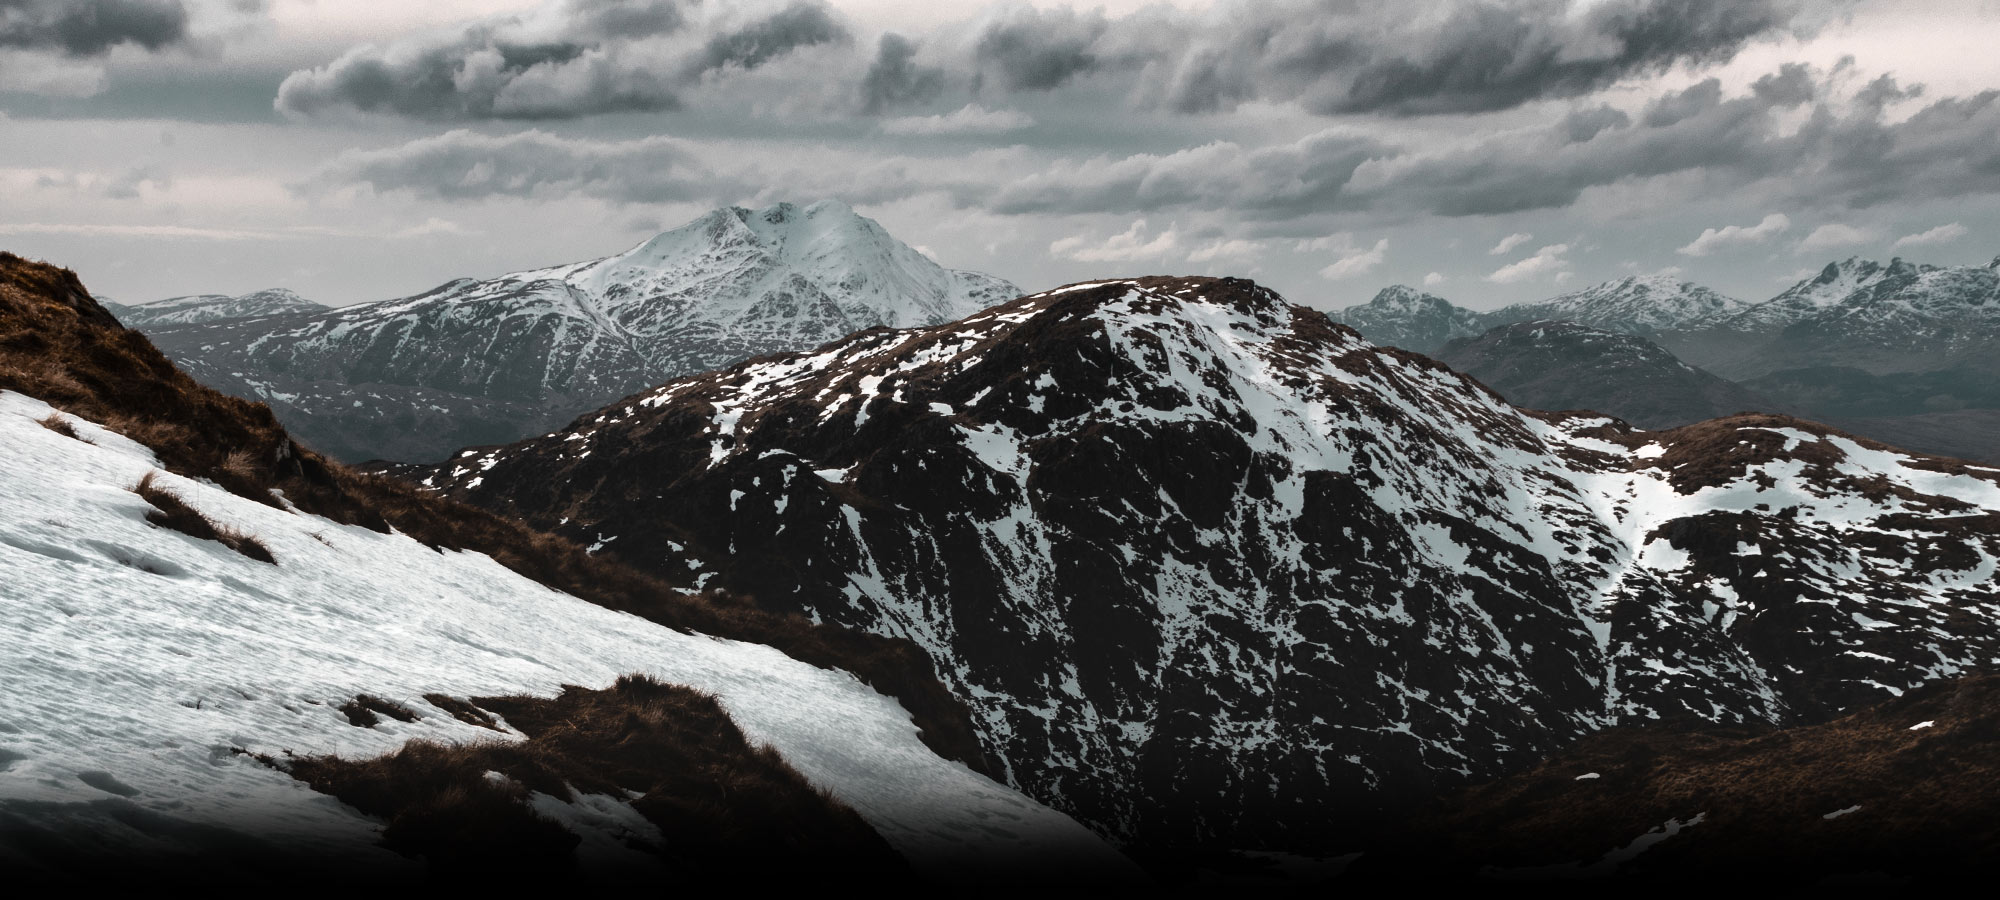 A View of the Scottish Mountains